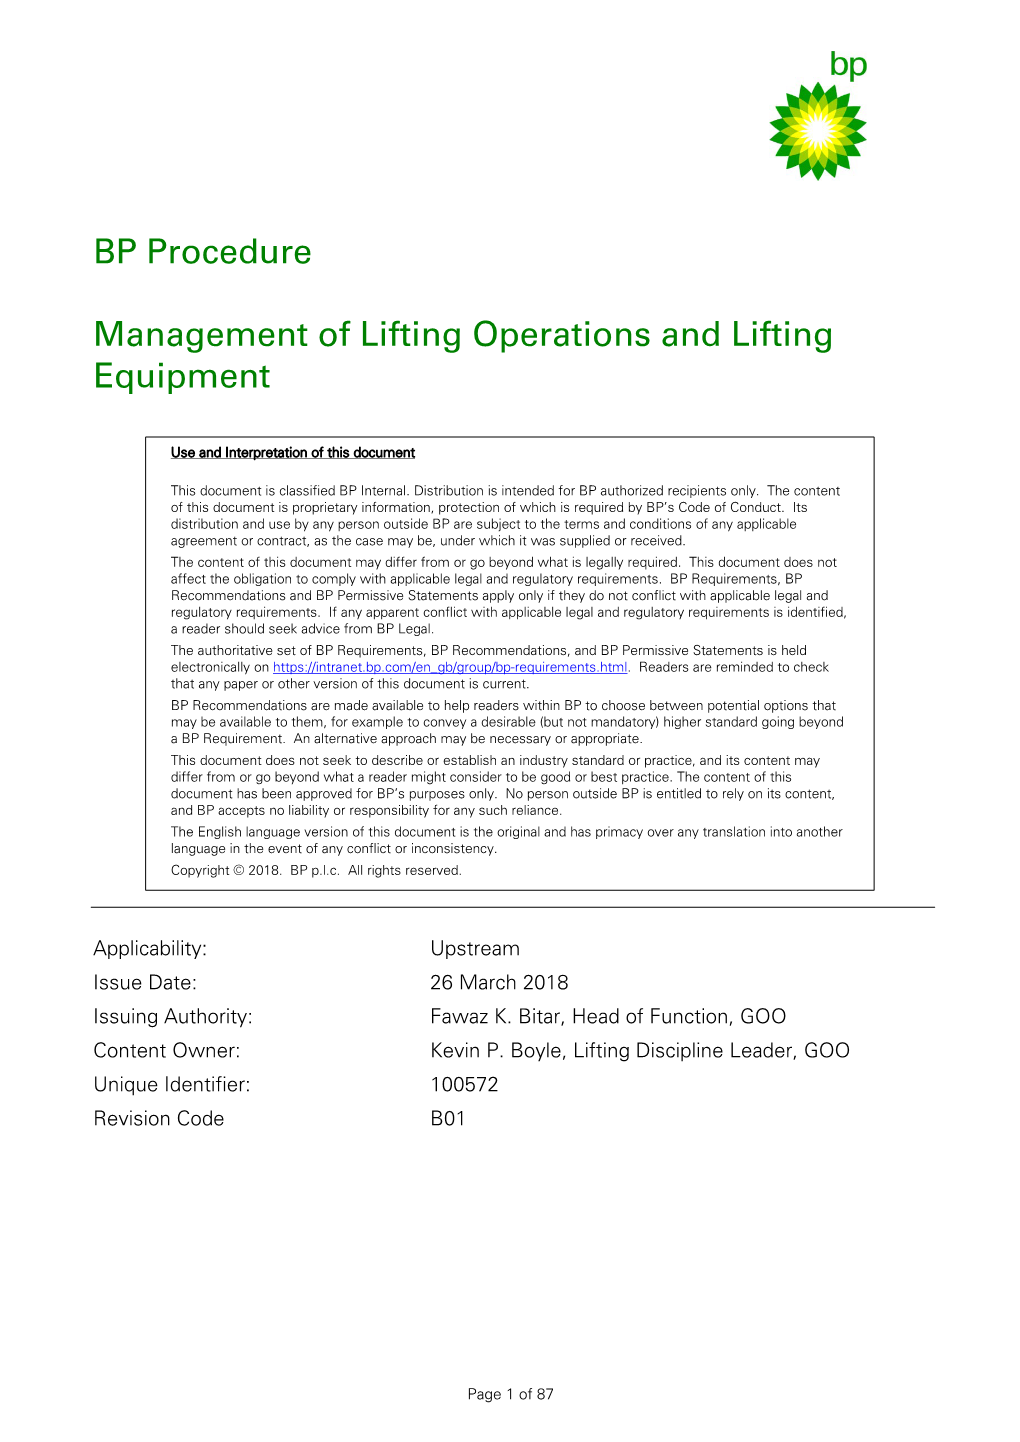 Management of Lifting Operations and Lifting Equipment